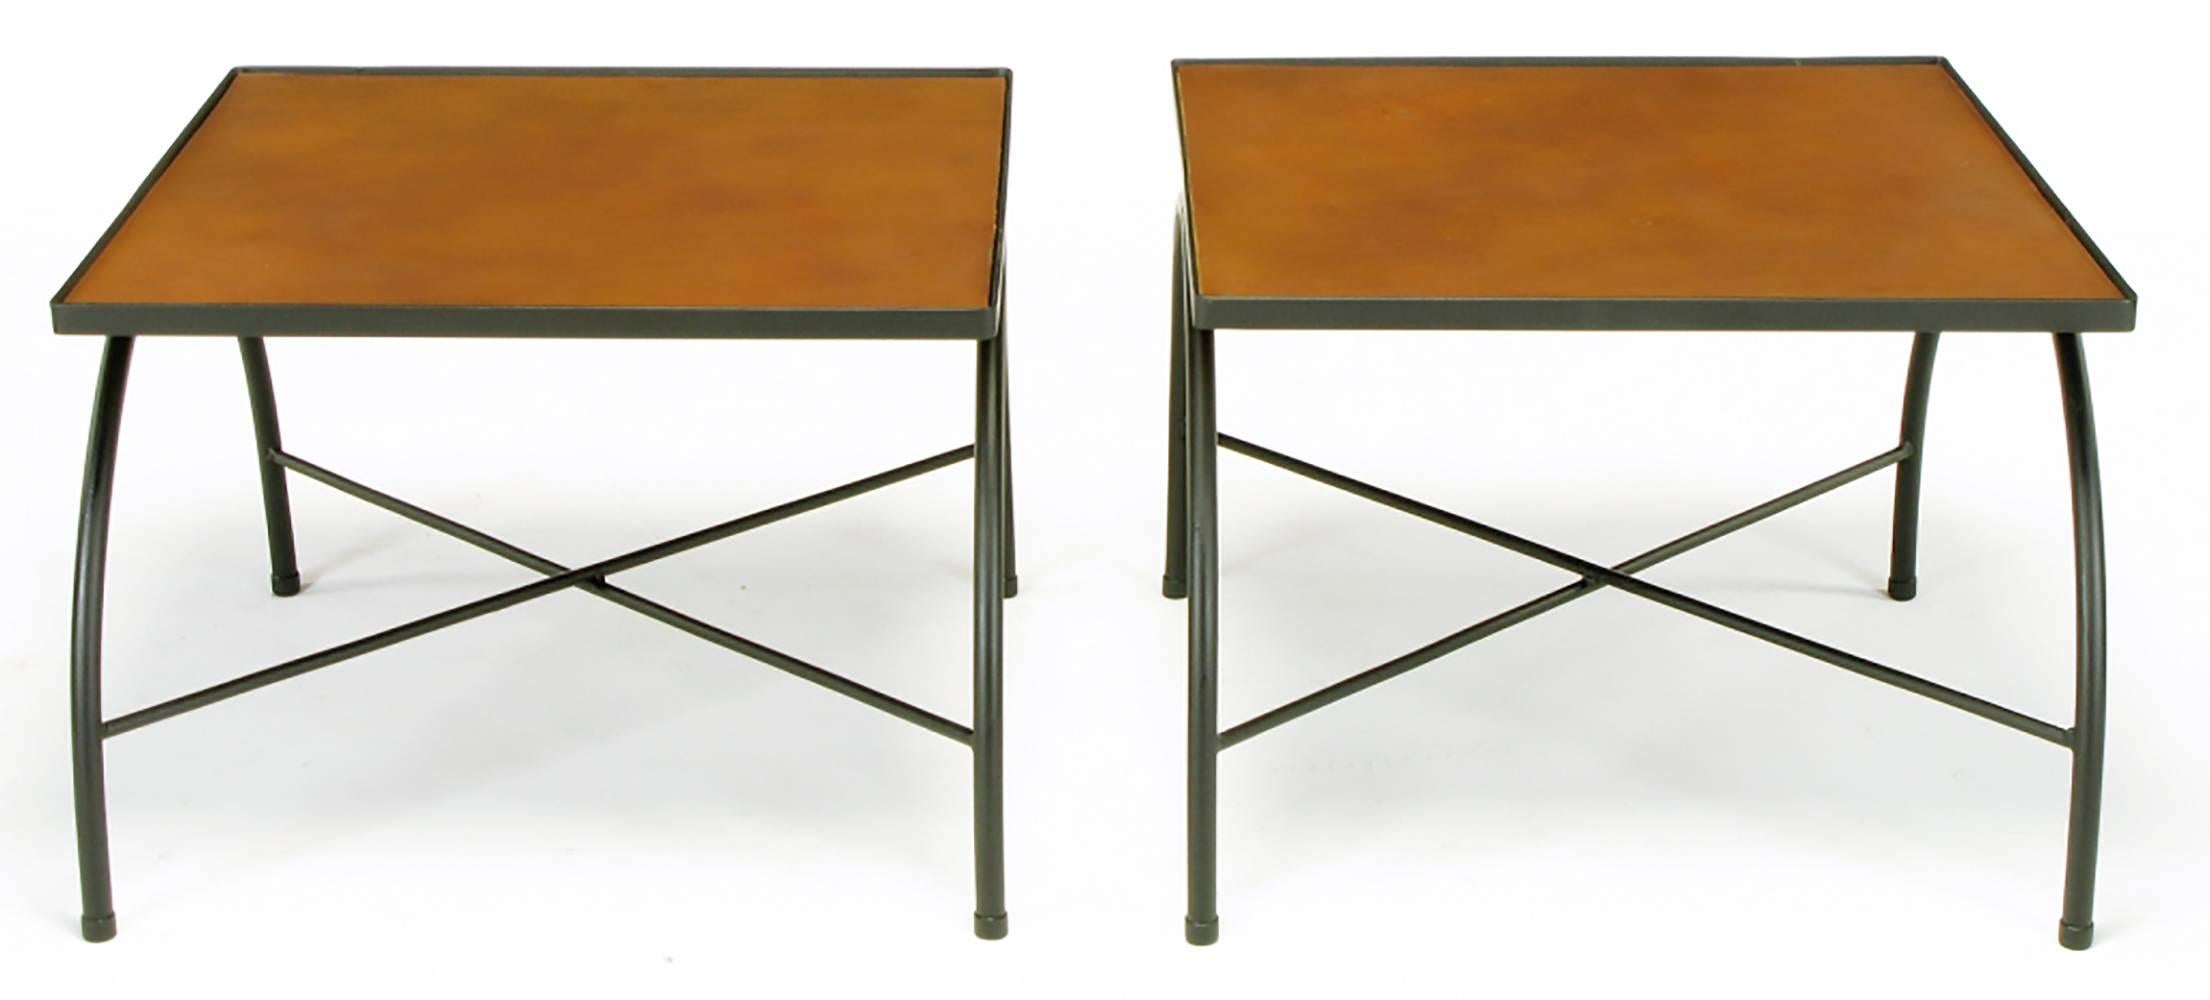 Streamlined Moderne Black Lacquered Wrought Iron and Leather X-Base End Tables after Jacques Adnet For Sale